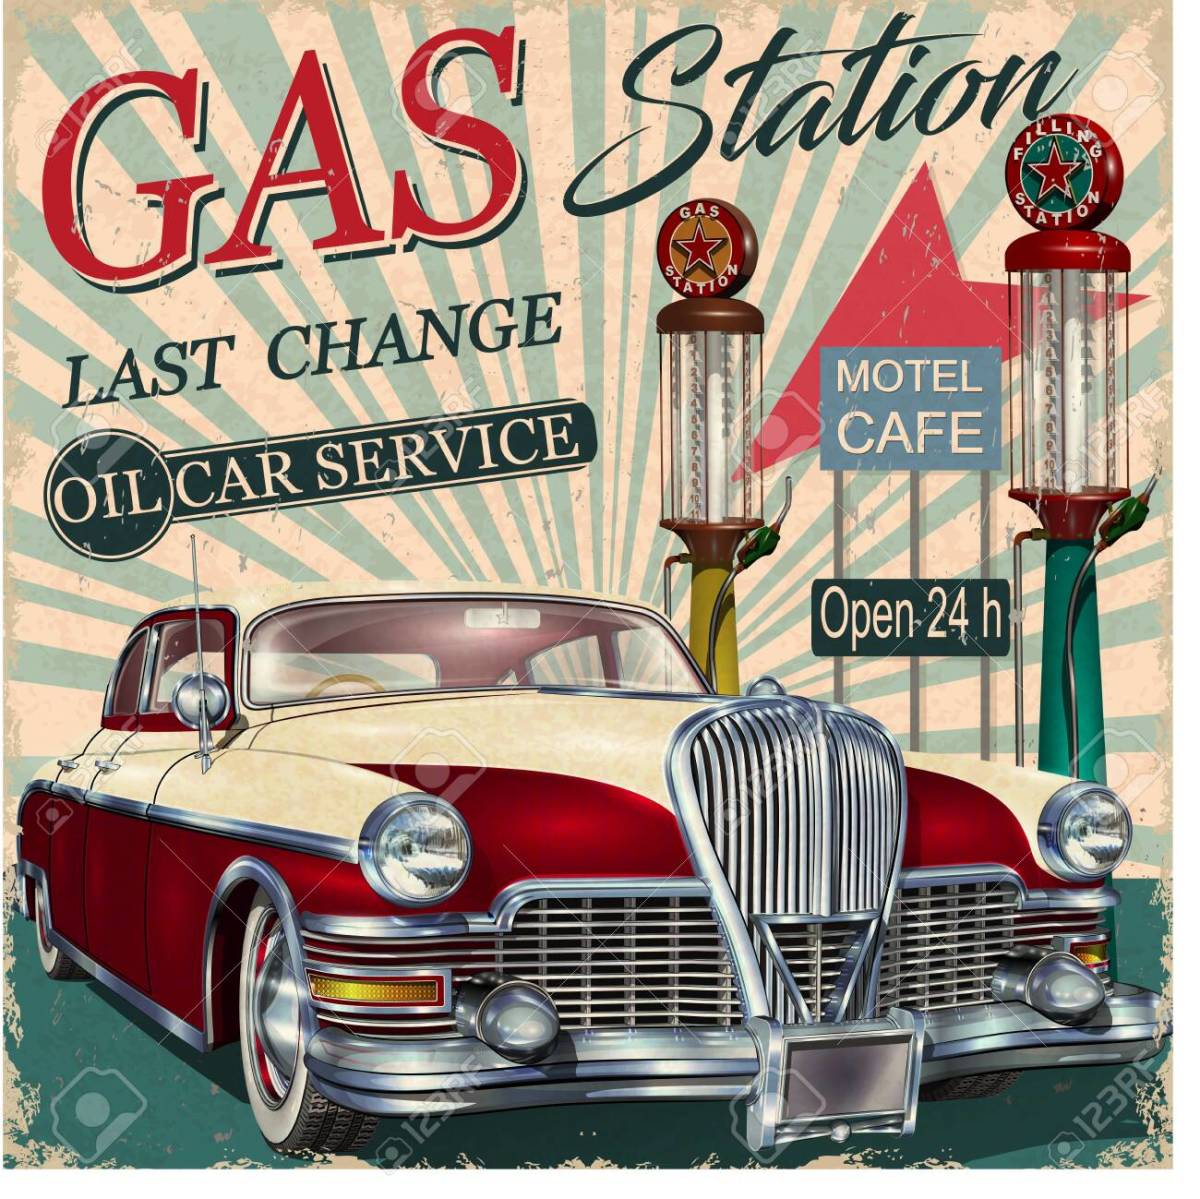 History of Gasoline Pricing: How 9/10th of a Cent Became Standard in ...